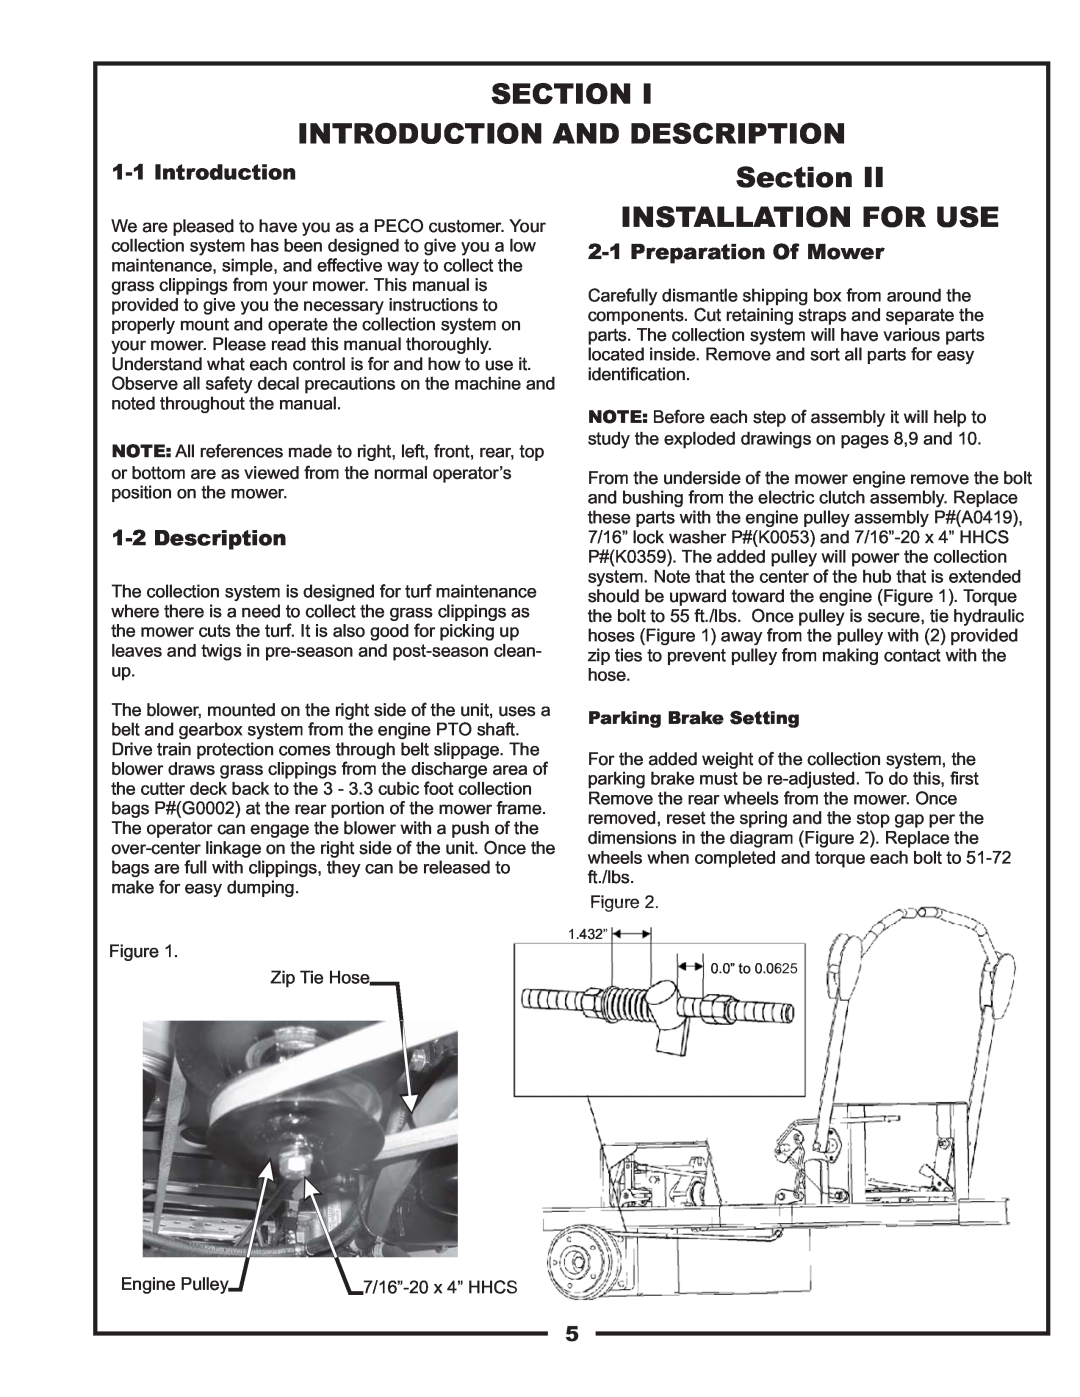 Gravely 12031301, 12031302 manual Section Introduction And Description, Section INSTALLATION FOR USE, Preparation Of Mower 